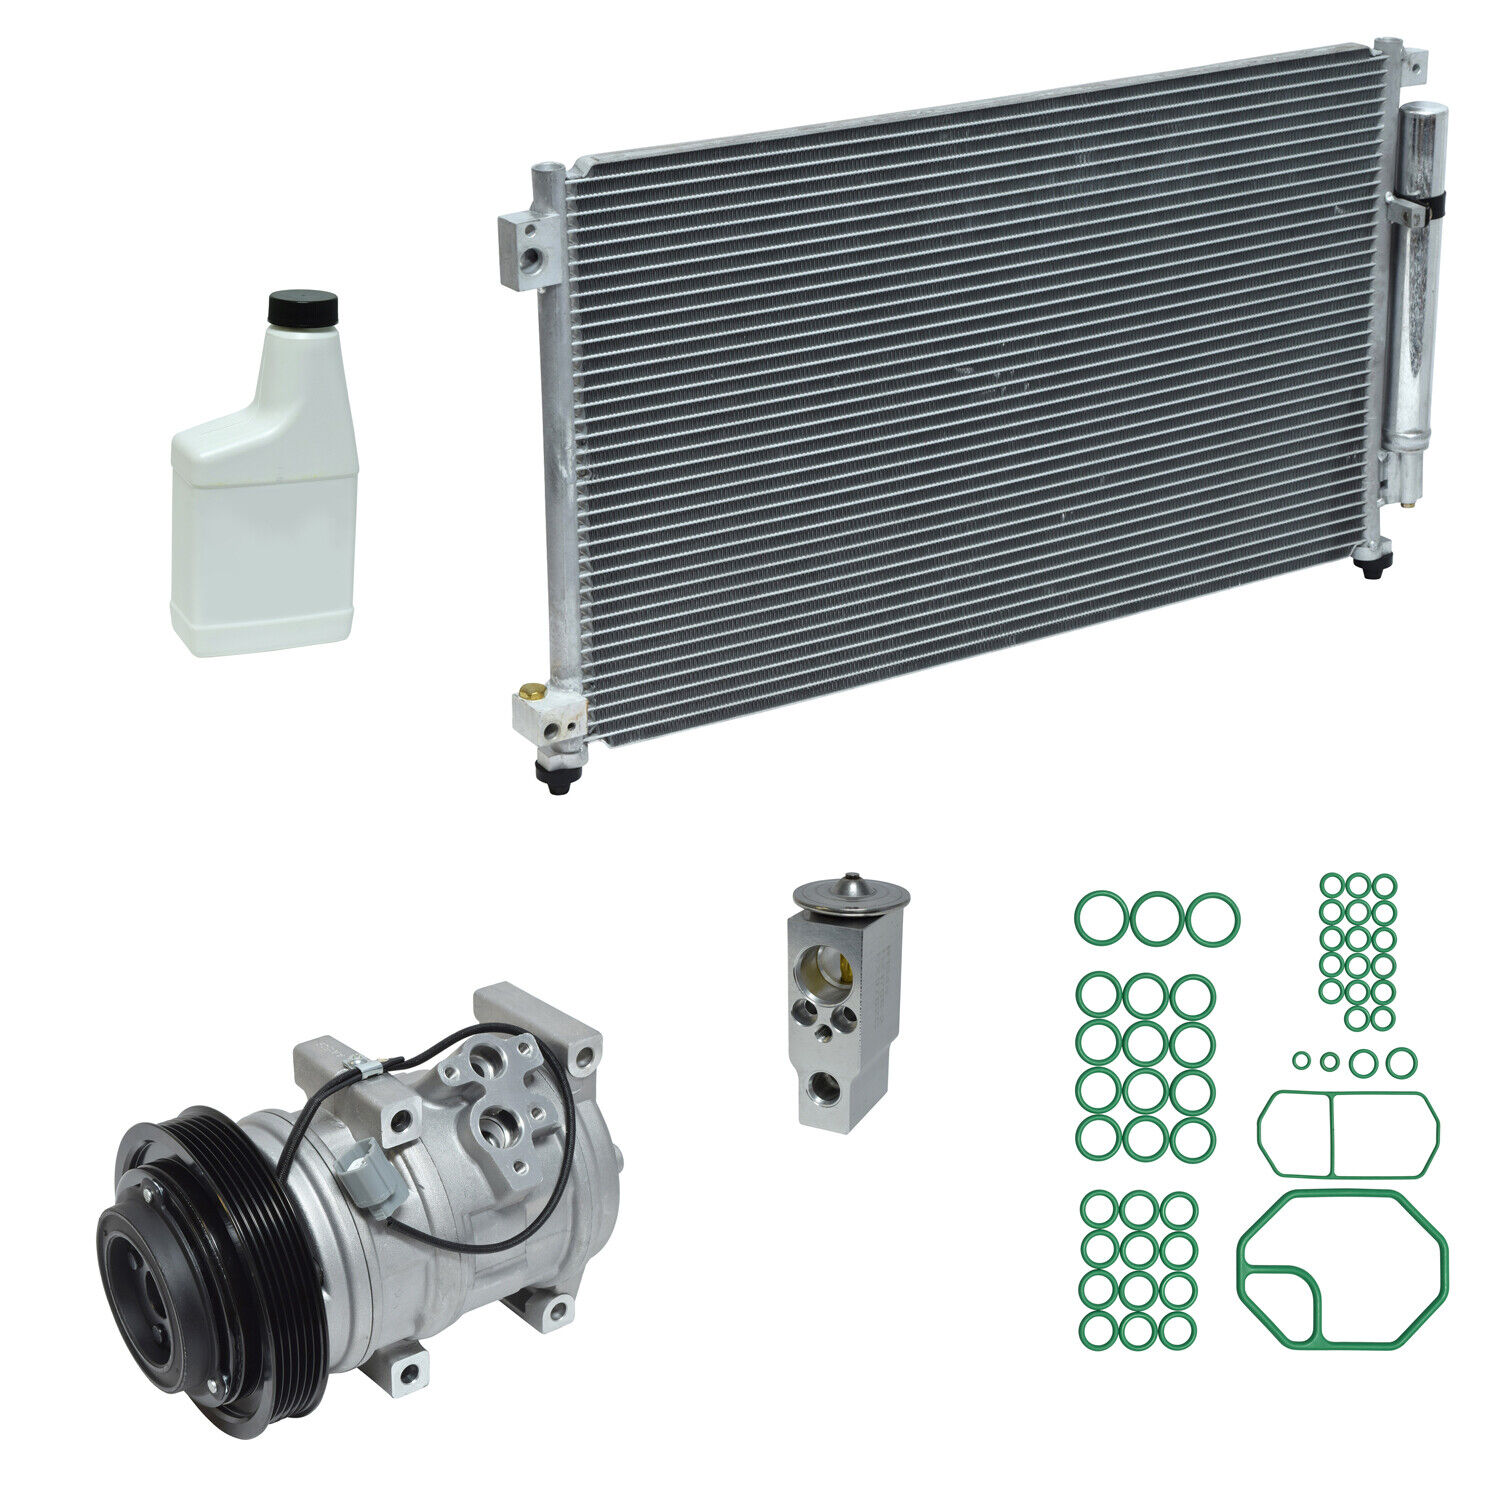 New A/C Compressor Kit for Accord